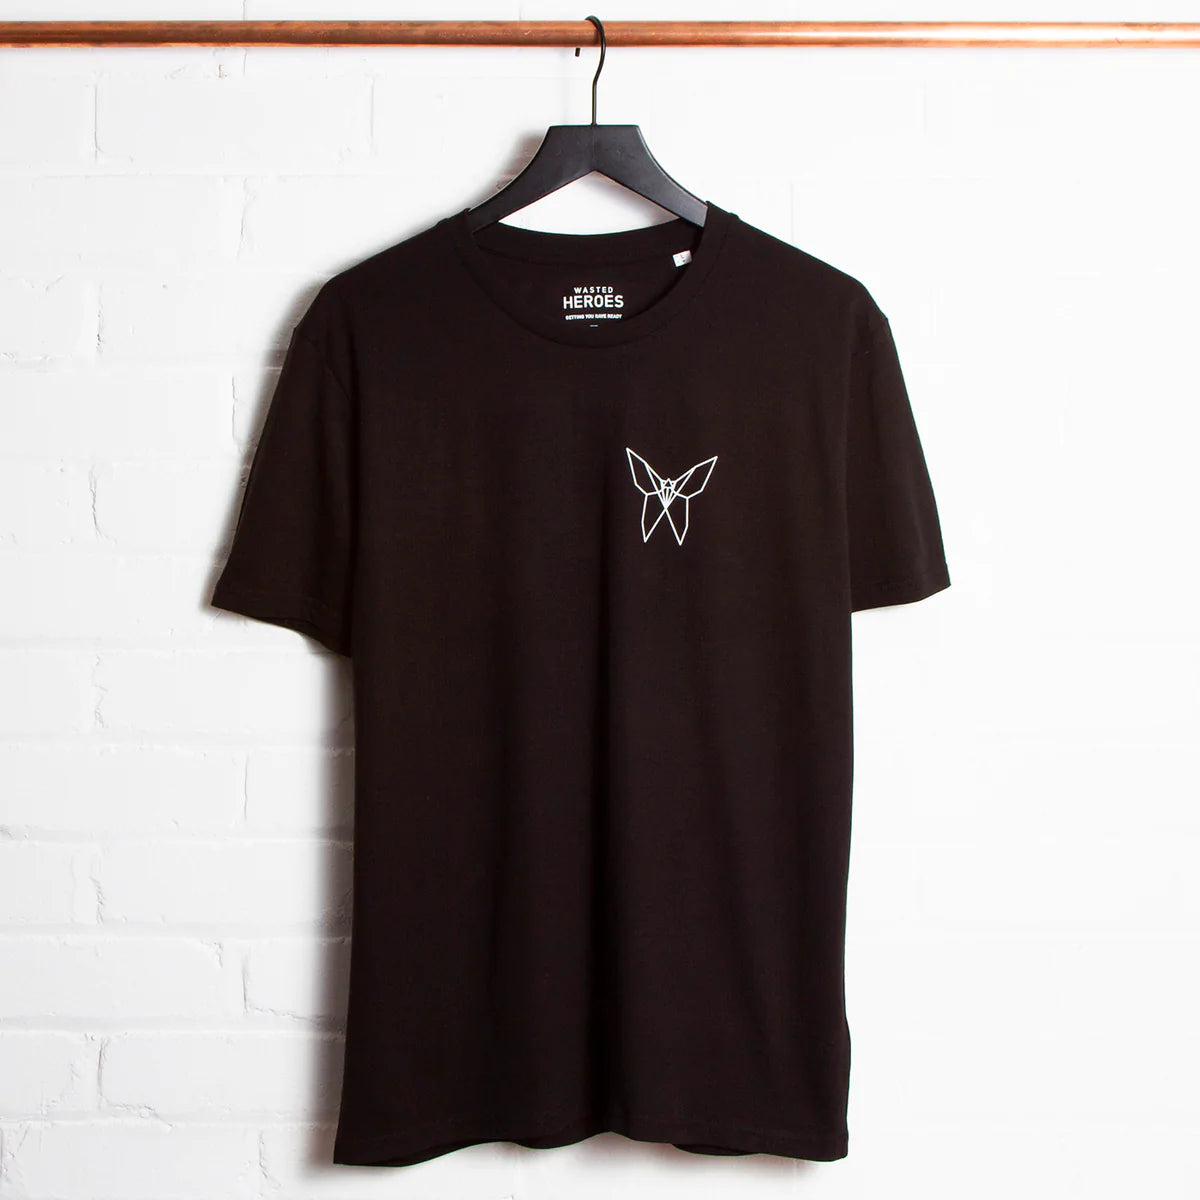 Crest origami Butterfly - Tshirt - Black